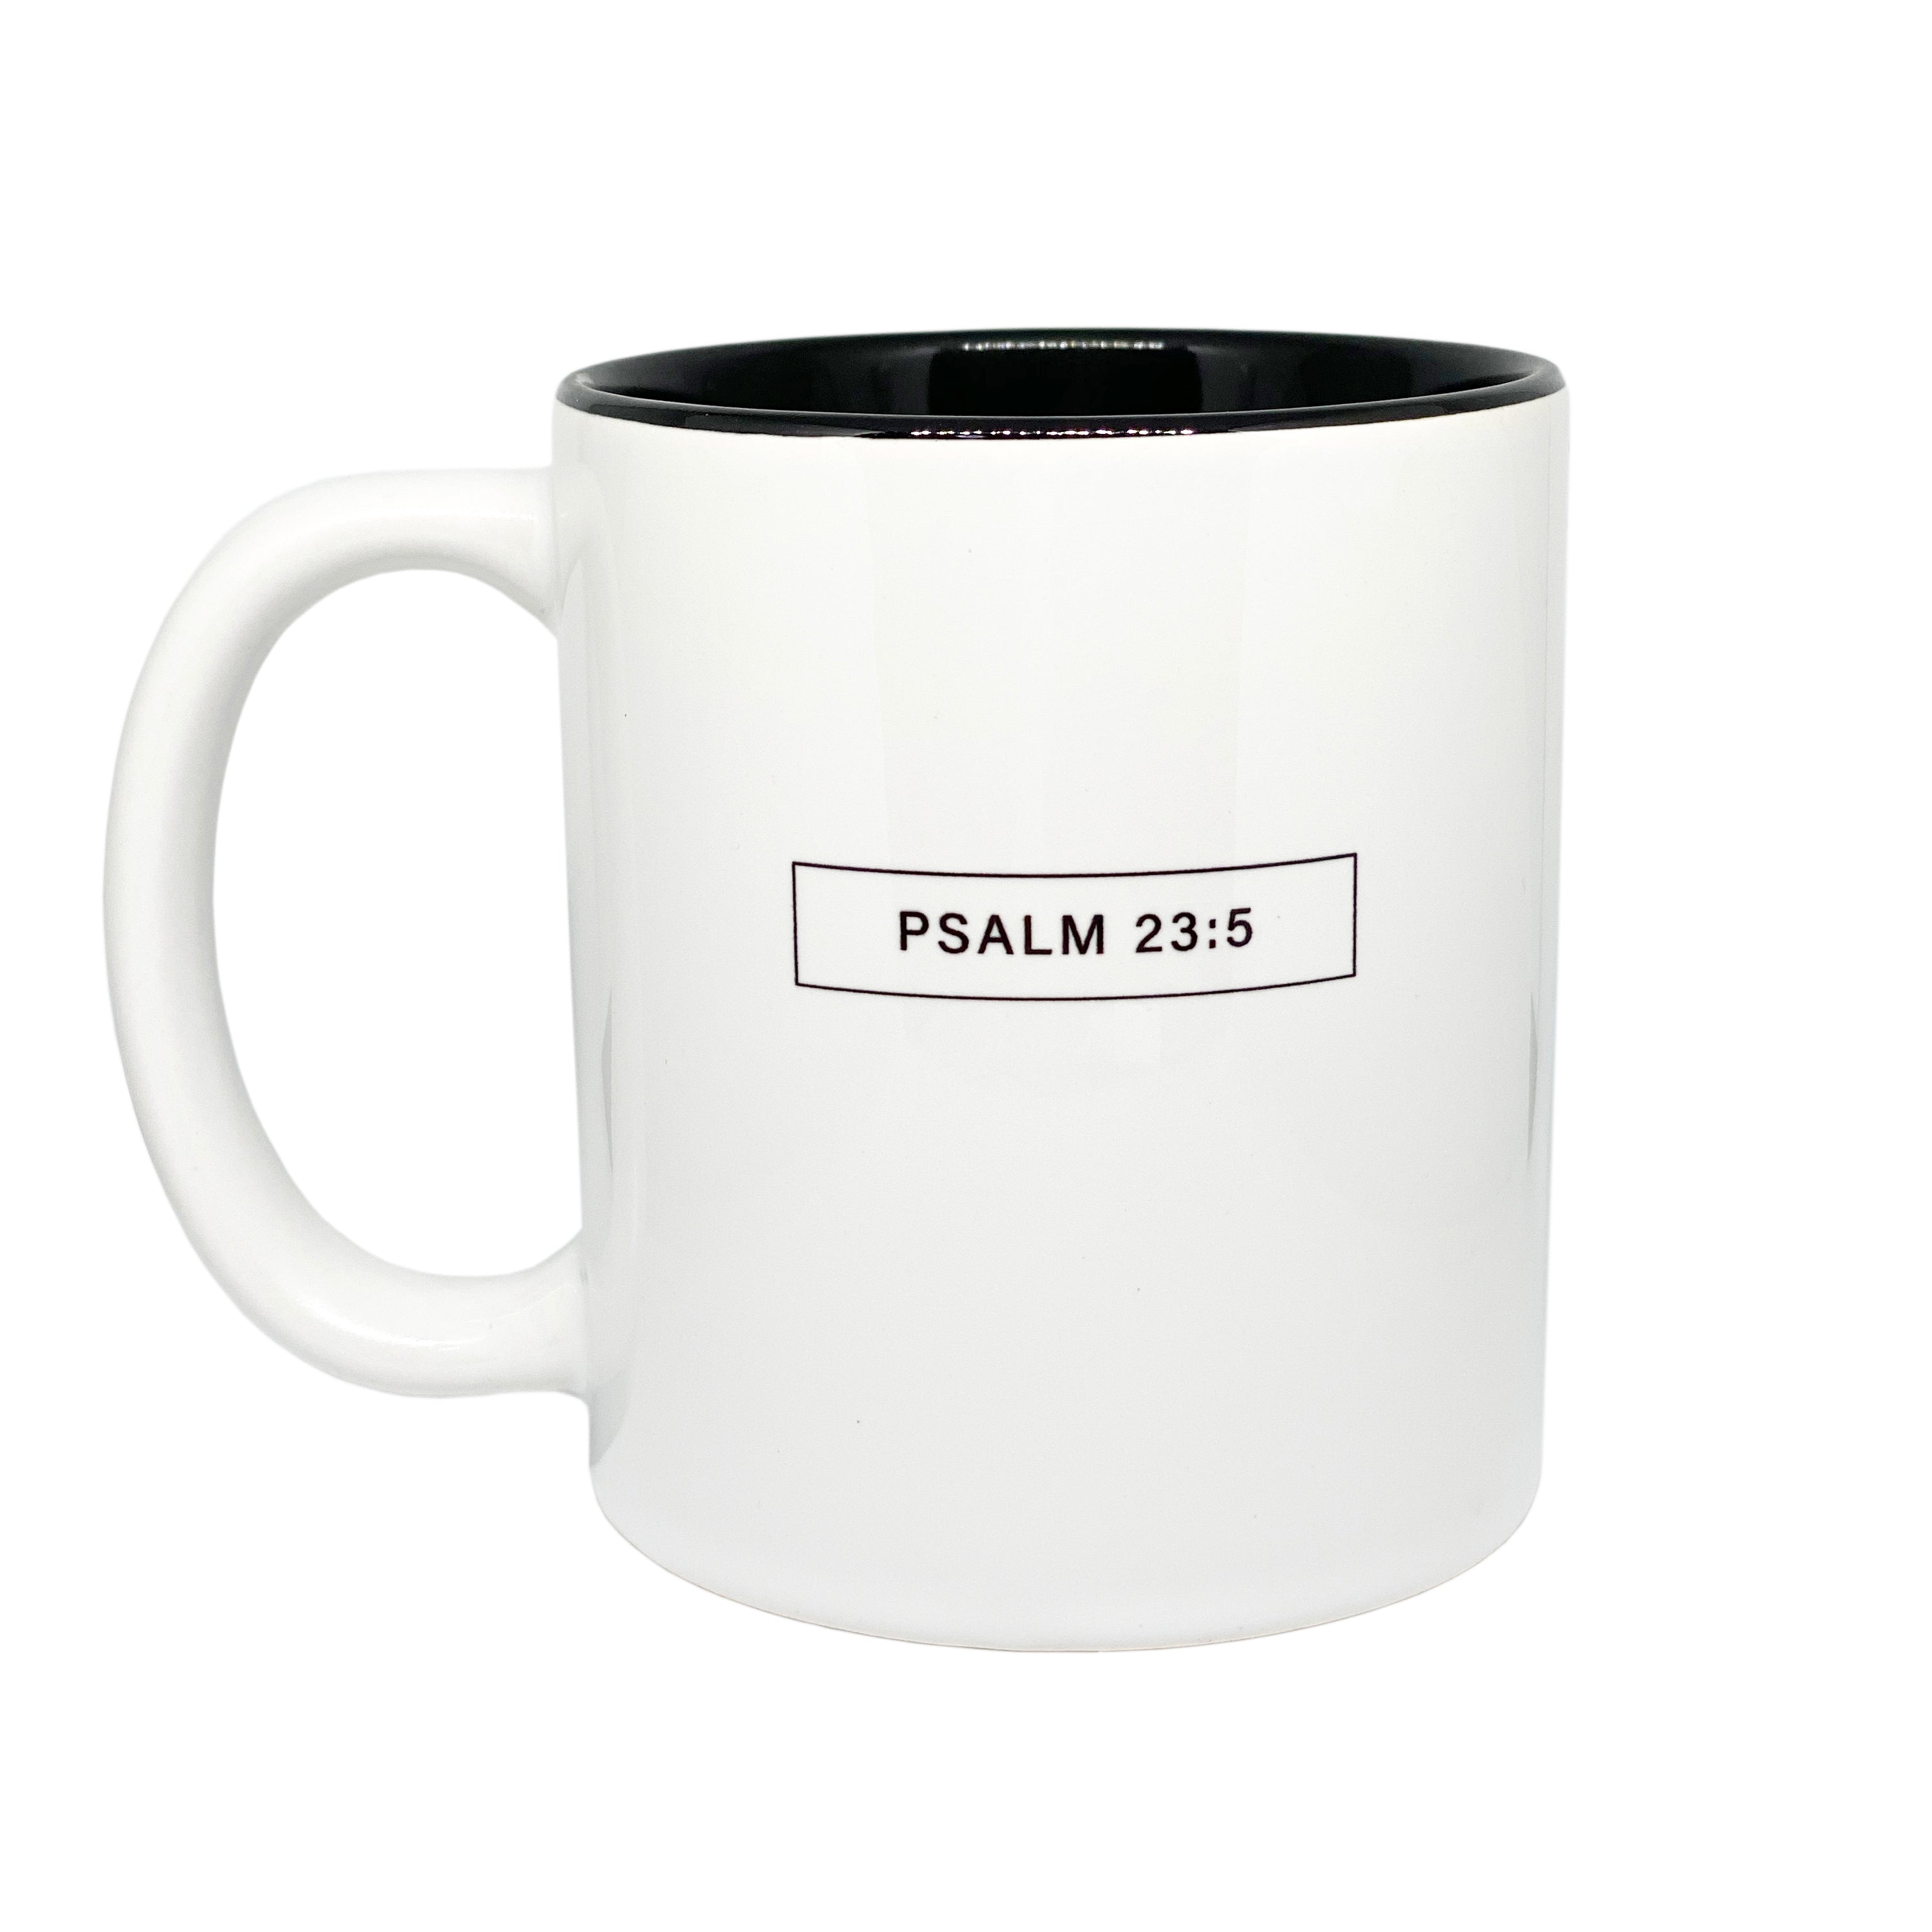 Christian Coffee Mug with Psalm 23:5 Bible Verse: Christian Gift Ideas for the Minimalistic Christian Home. White Black 11oz